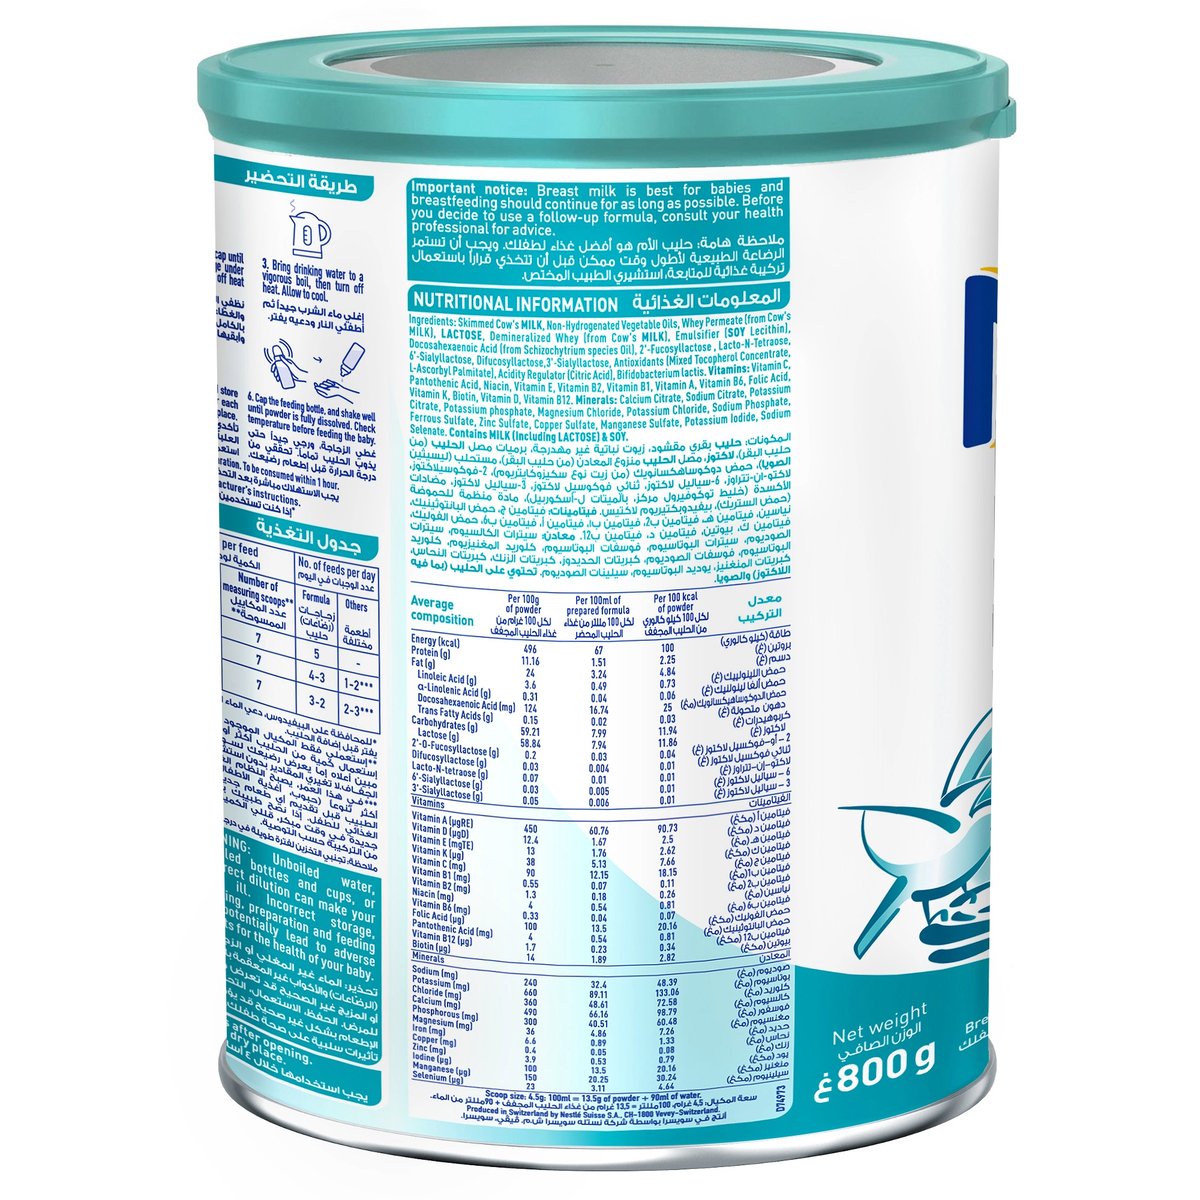 Nestle NAN Optipro Stage 2 Follow Up Formula From 6 to 12 Months 800 g